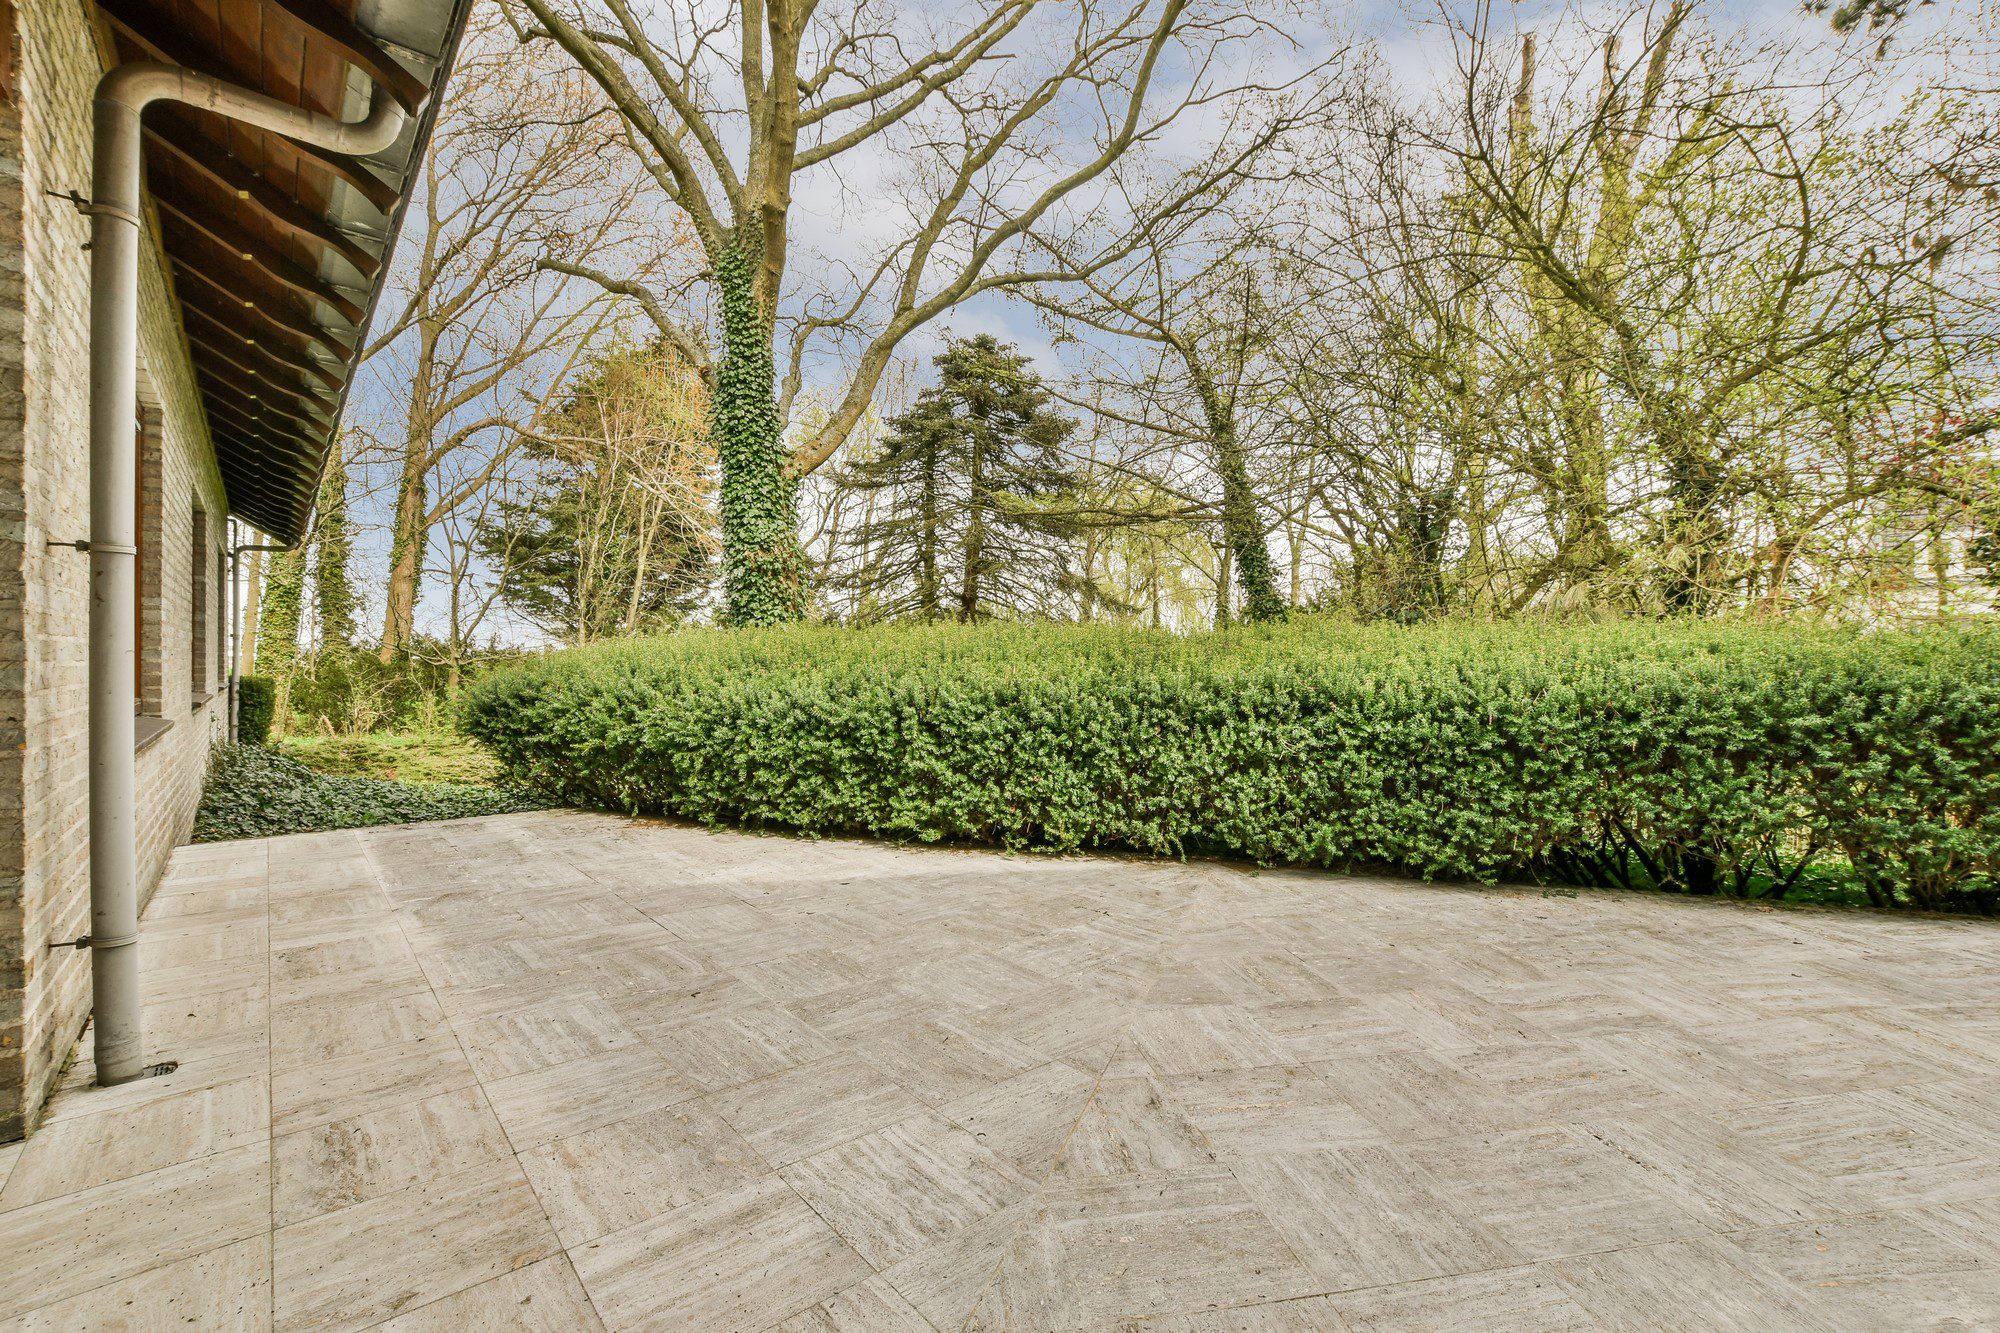 This image shows an outdoor patio area adjacent to a building. The patio has tile flooring with a herringbone pattern. To the right, there is a well-maintained, dense hedge providing privacy and a green backdrop. Large trees with bare branches suggest the photo might have been taken in a season when trees have not yet fully leafed out, possibly late winter or early spring. There's also an overhang from the building providing shelter for part of the patio, and a downspout from the gutter is visible along the column of the building. The sky is partly cloudy, and the surrounding environment appears to be a park or a garden with various trees and shrubs.